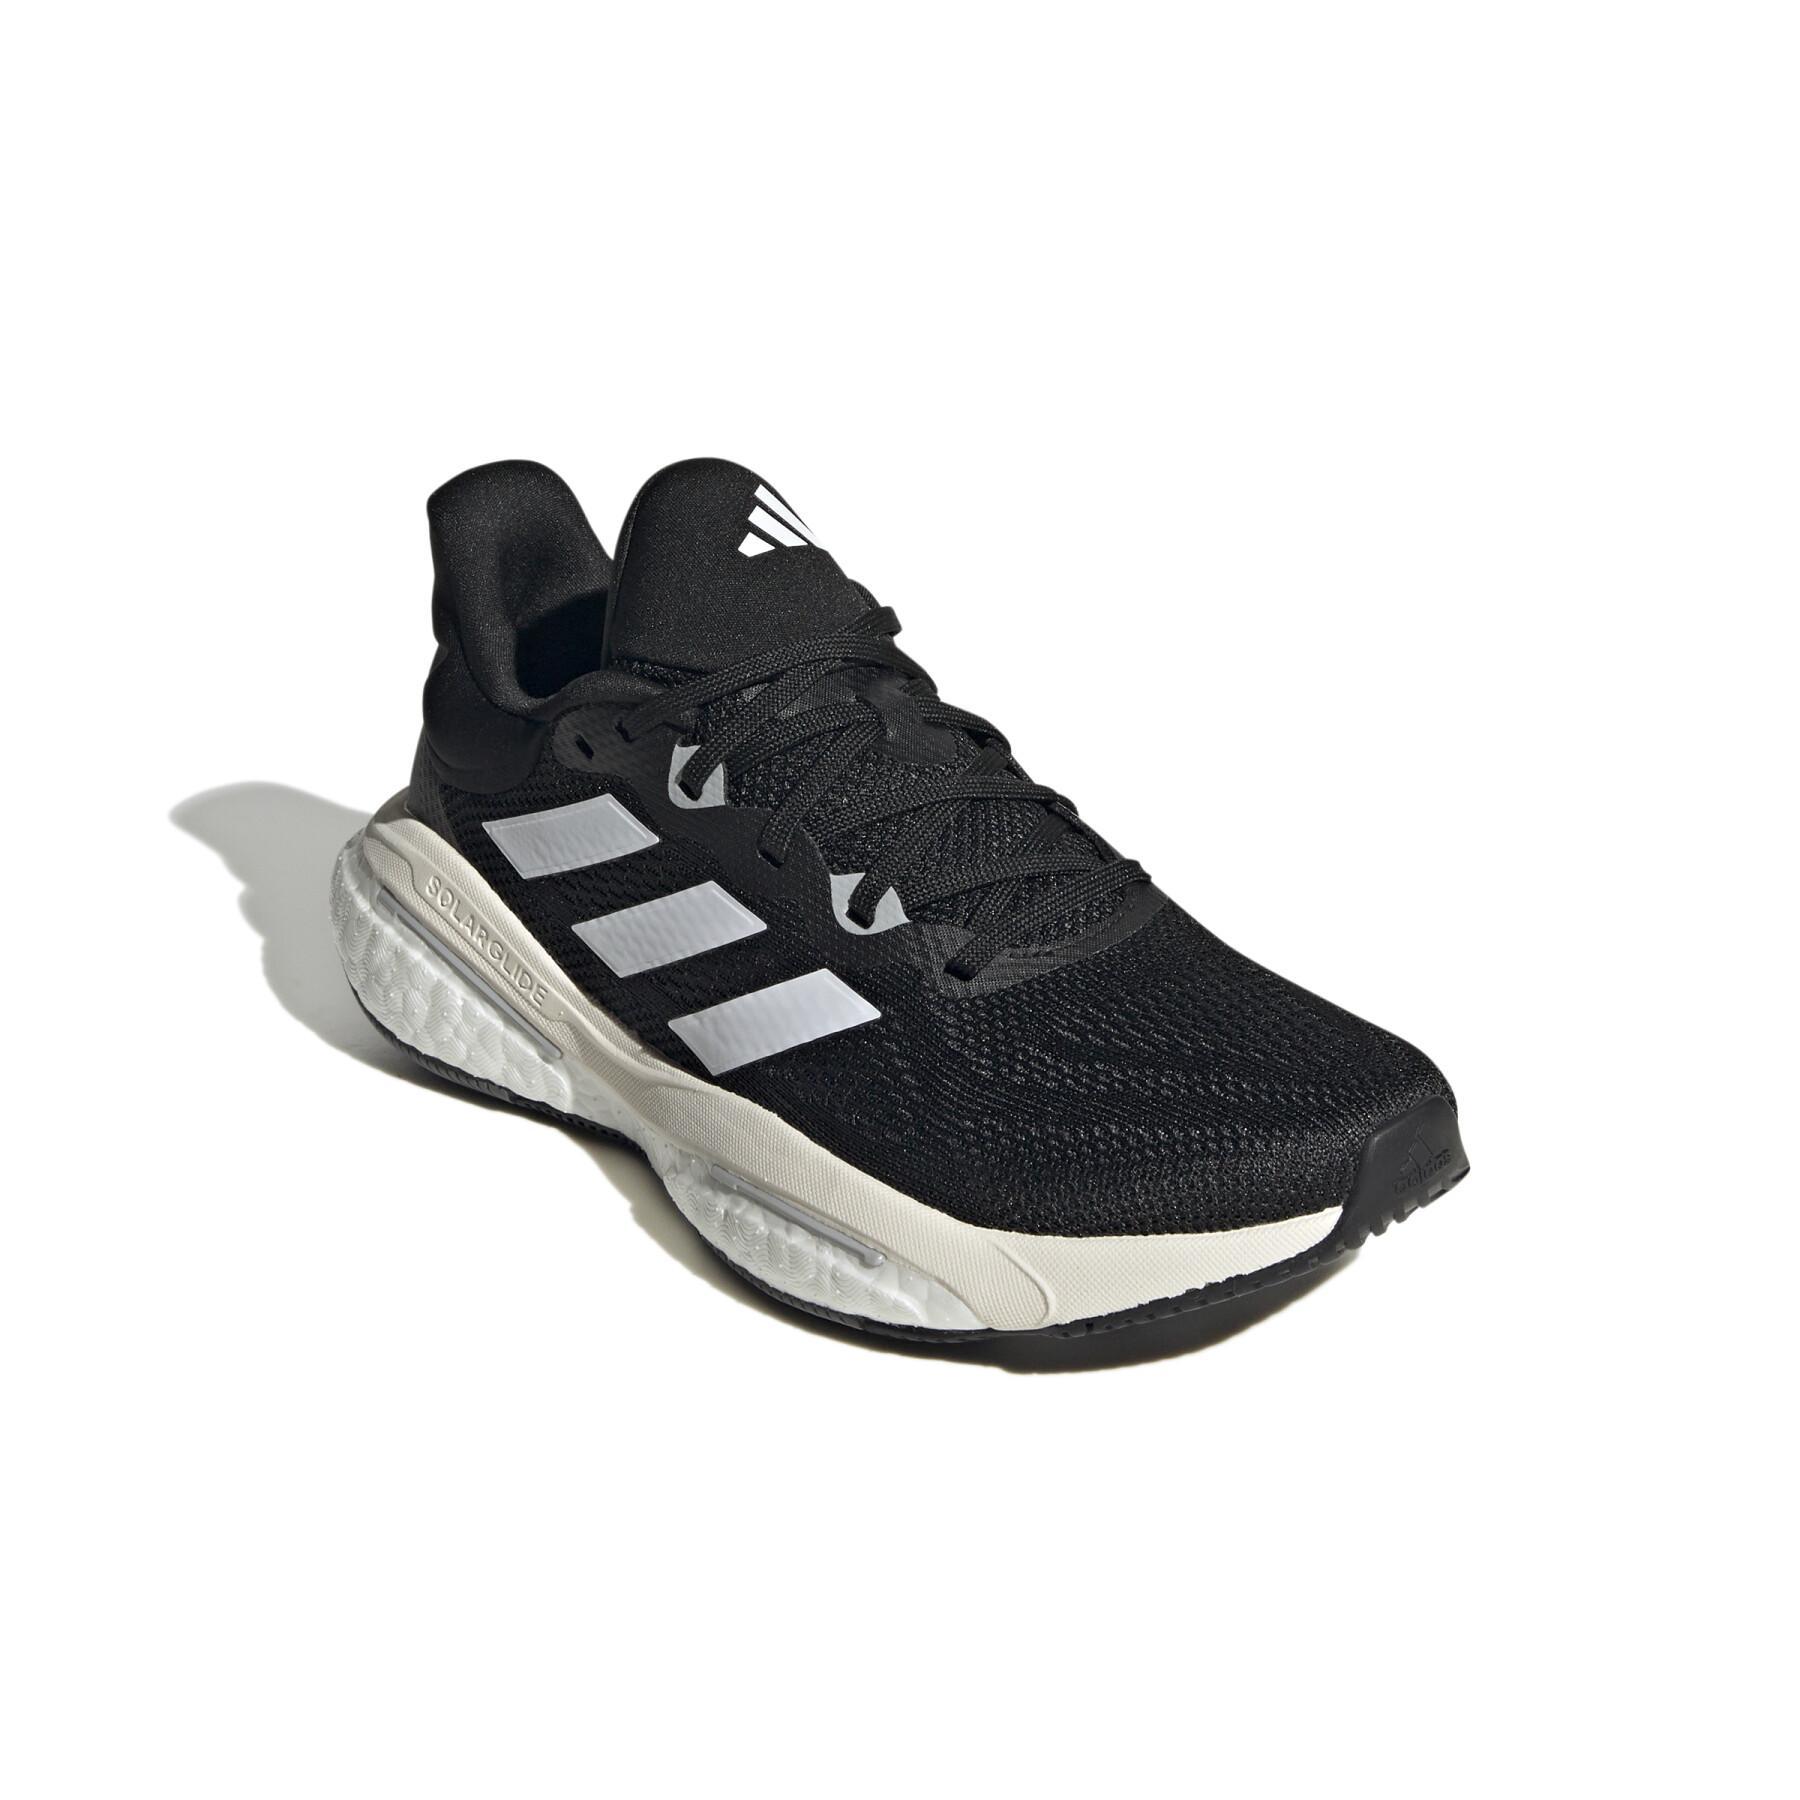 Women's running shoes adidas Solarglide 6